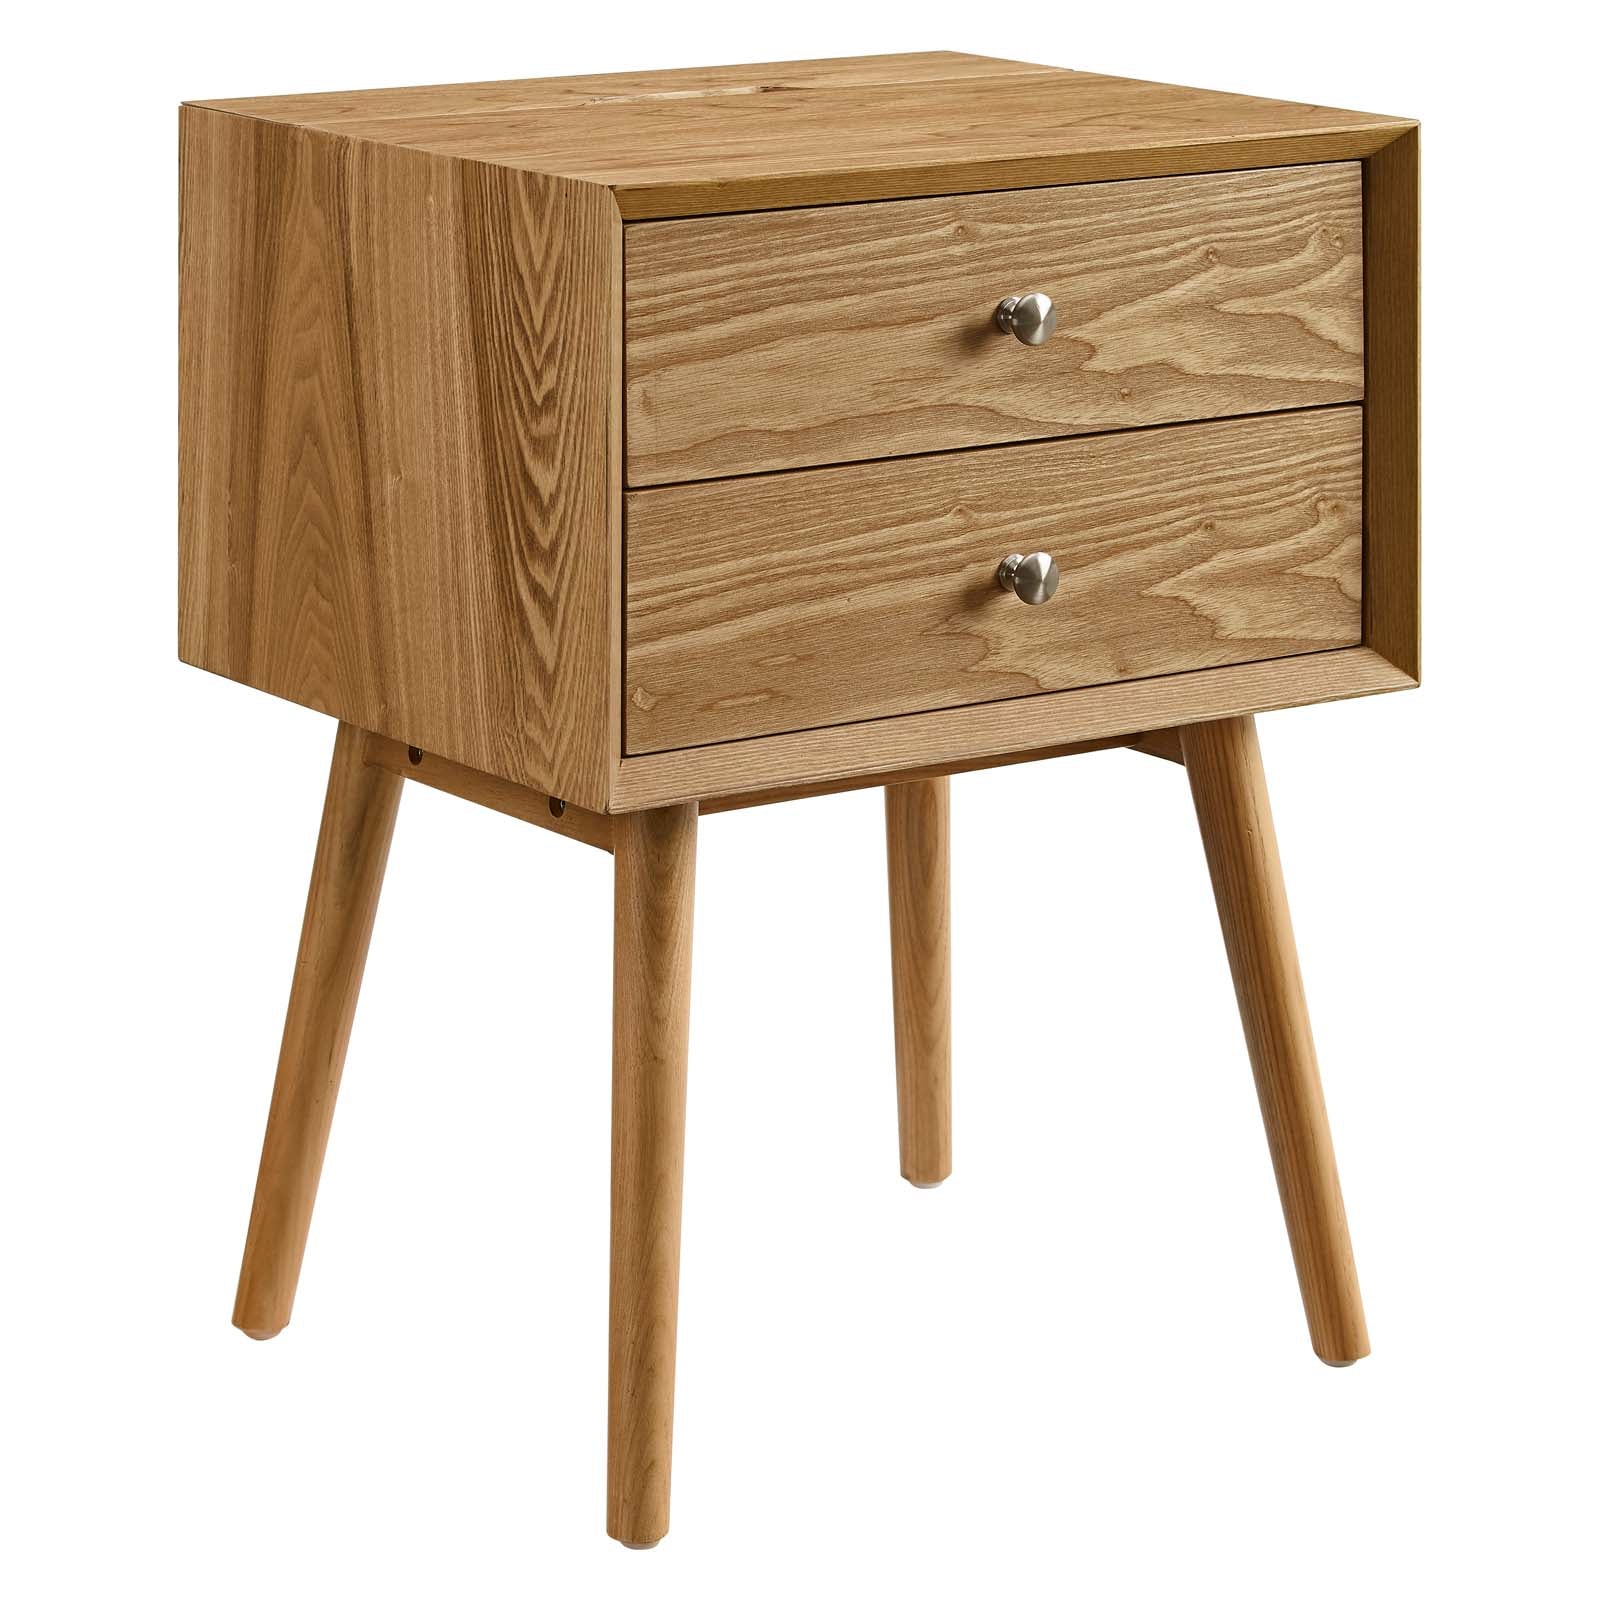 Modway Nightstands & Side Tables - Ember Wood Nightstand With USB Ports Natural Natural